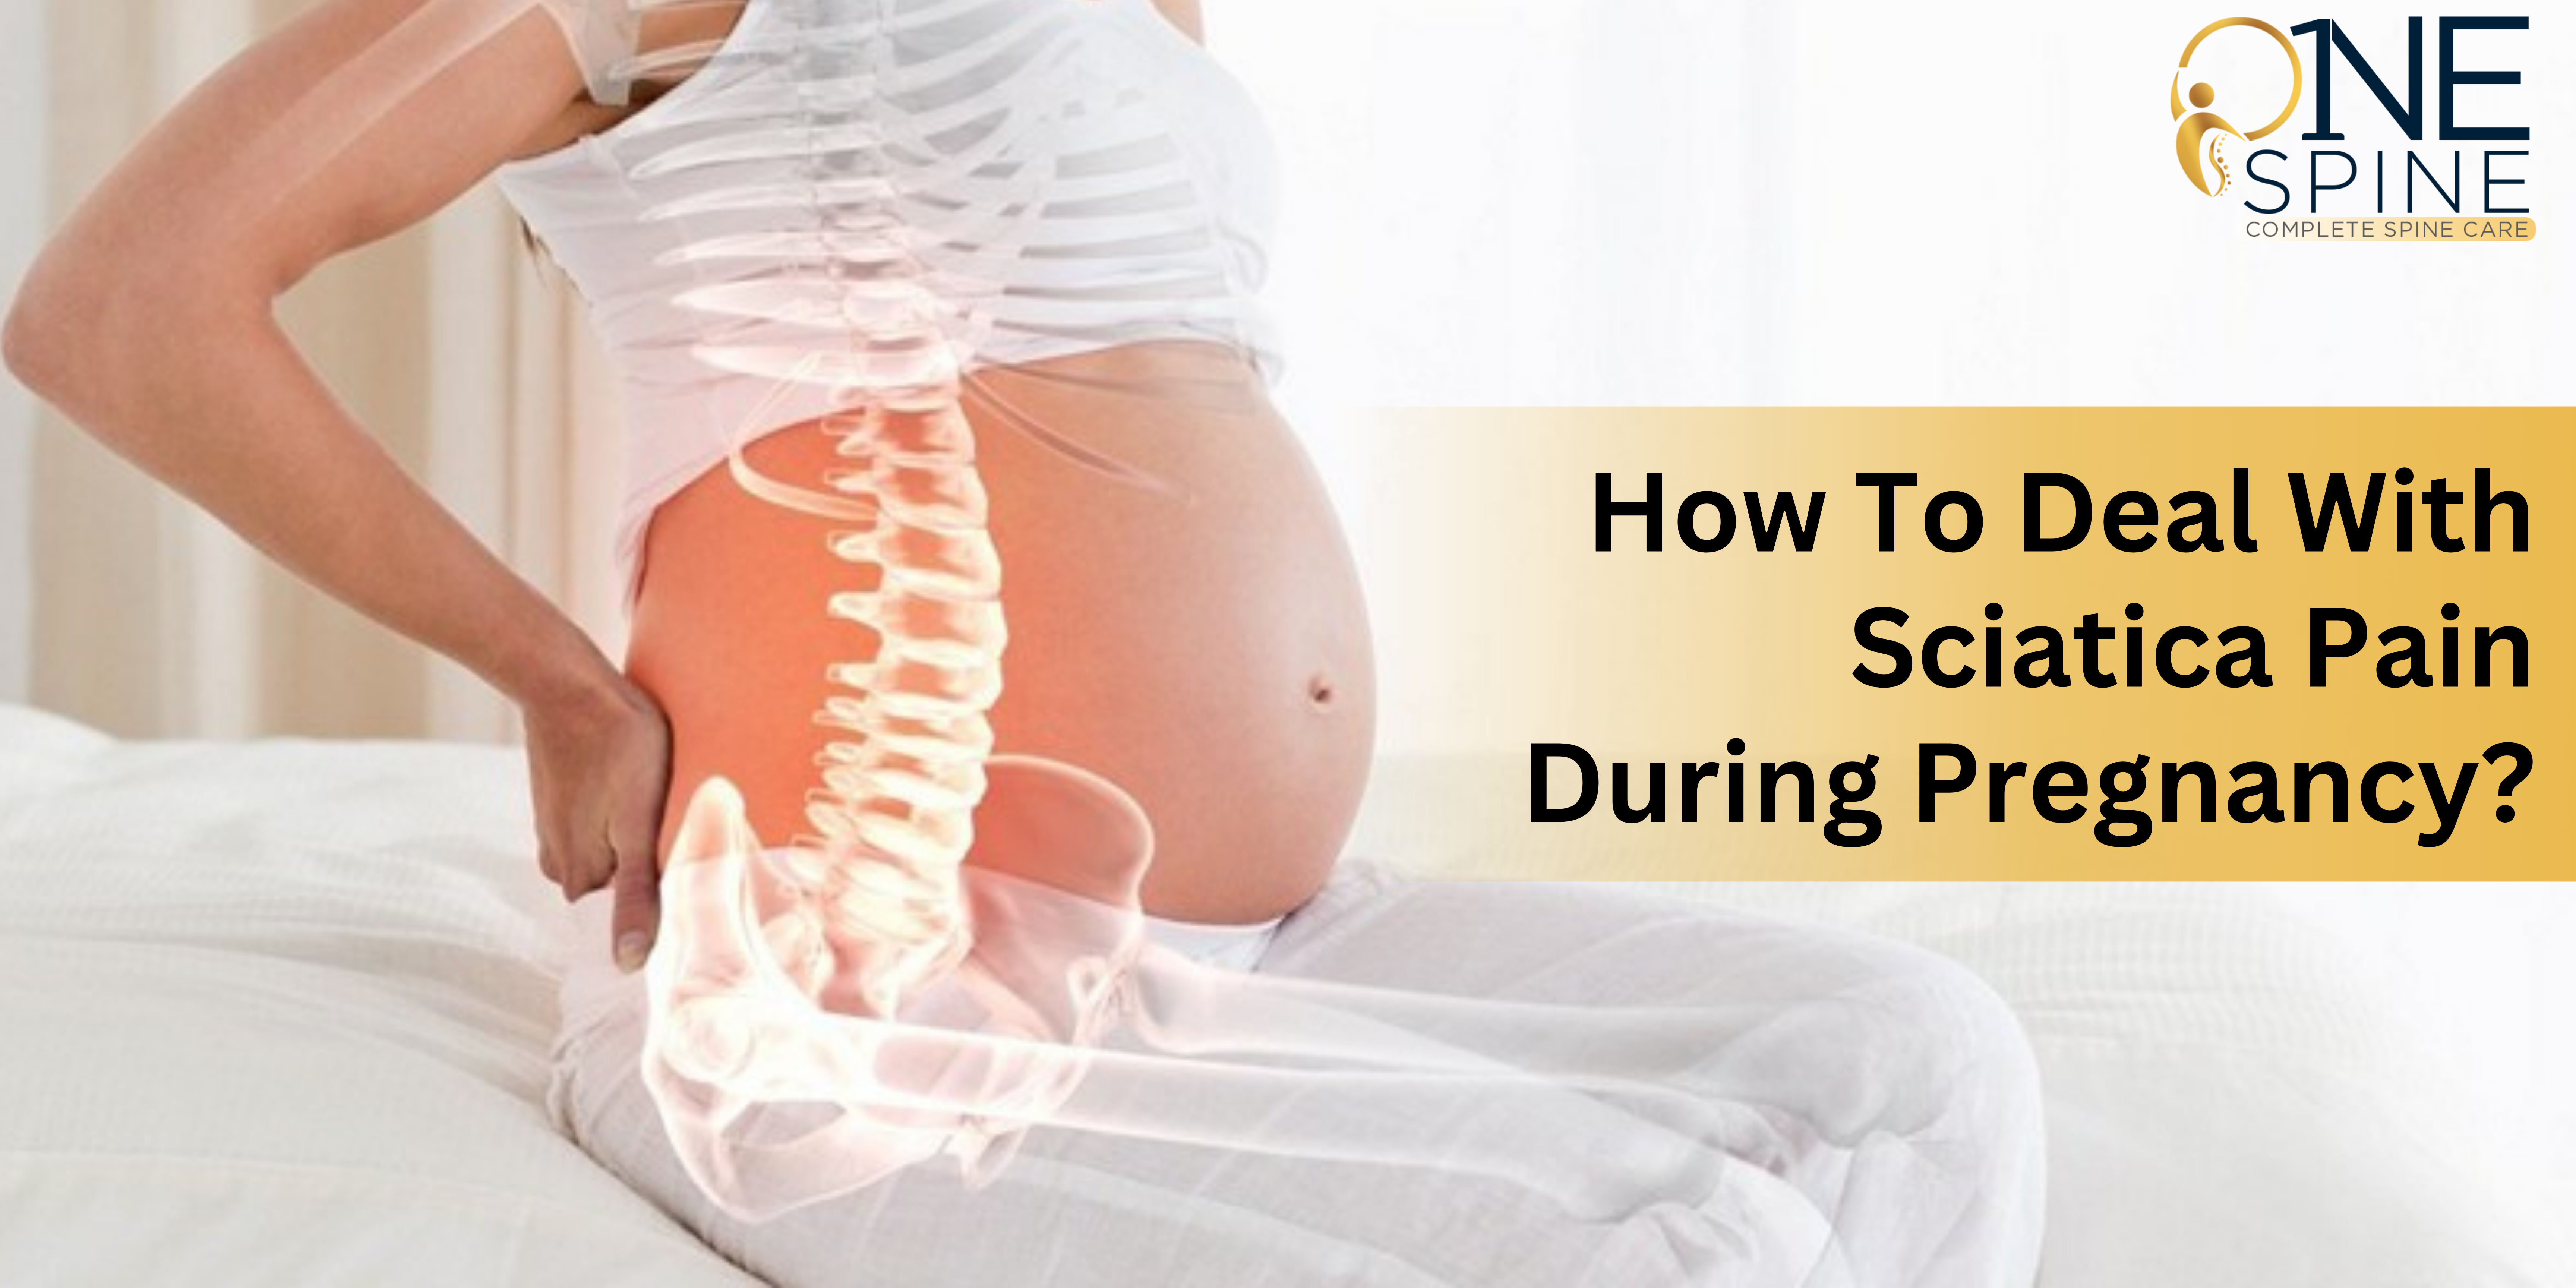 How to deal with Sciatica Pain during Pregnancy?